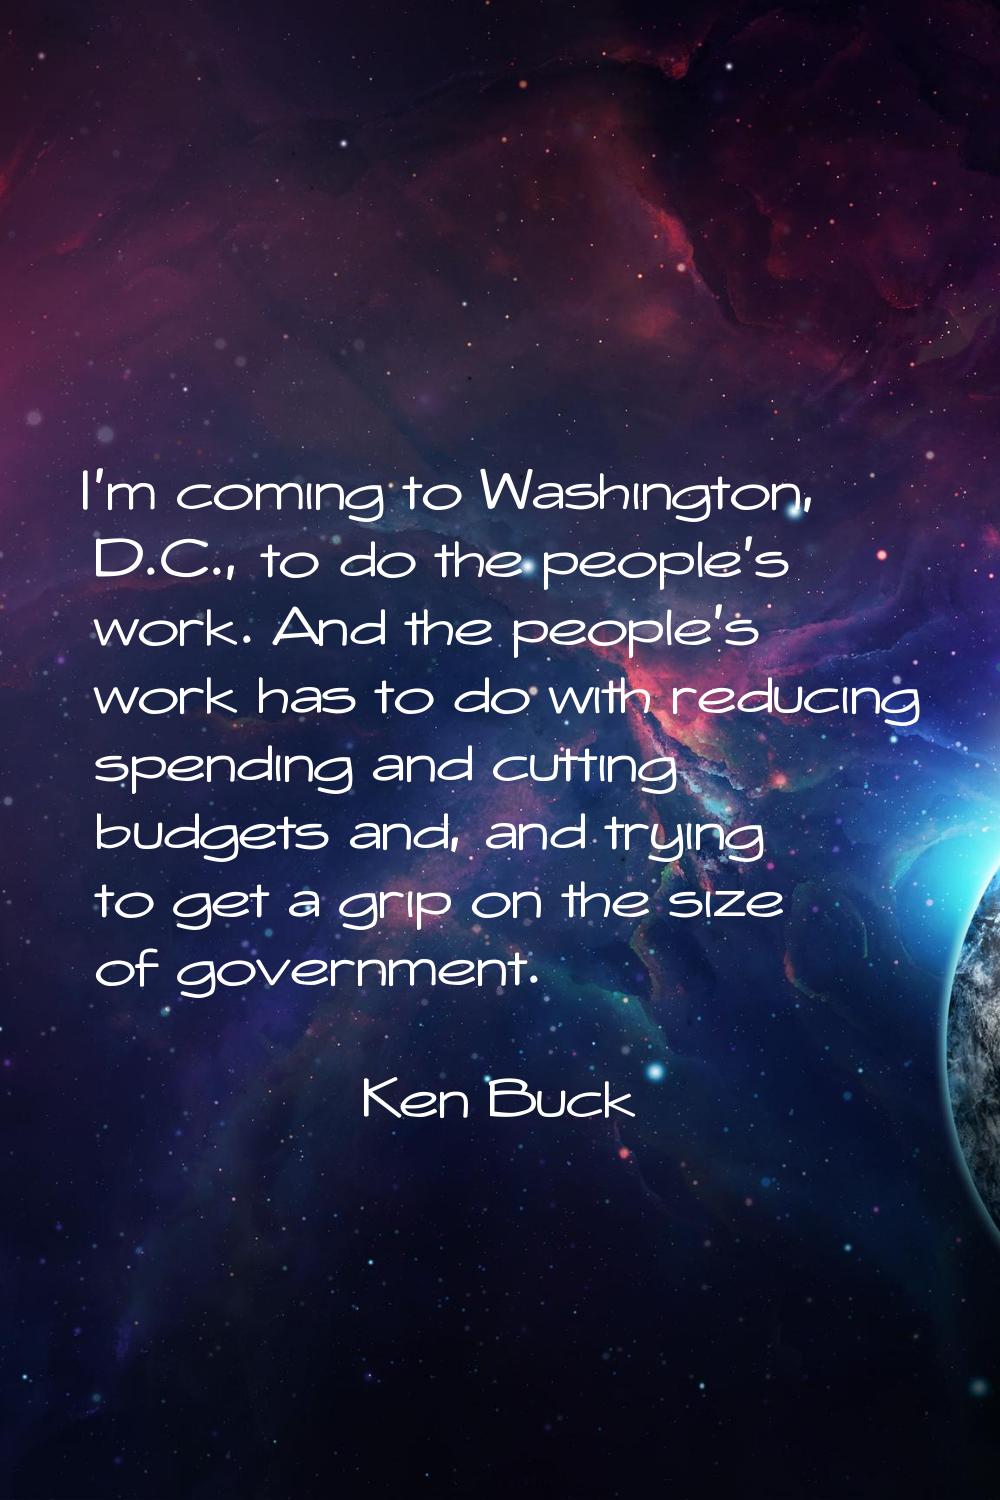 I'm coming to Washington, D.C., to do the people's work. And the people's work has to do with reduc